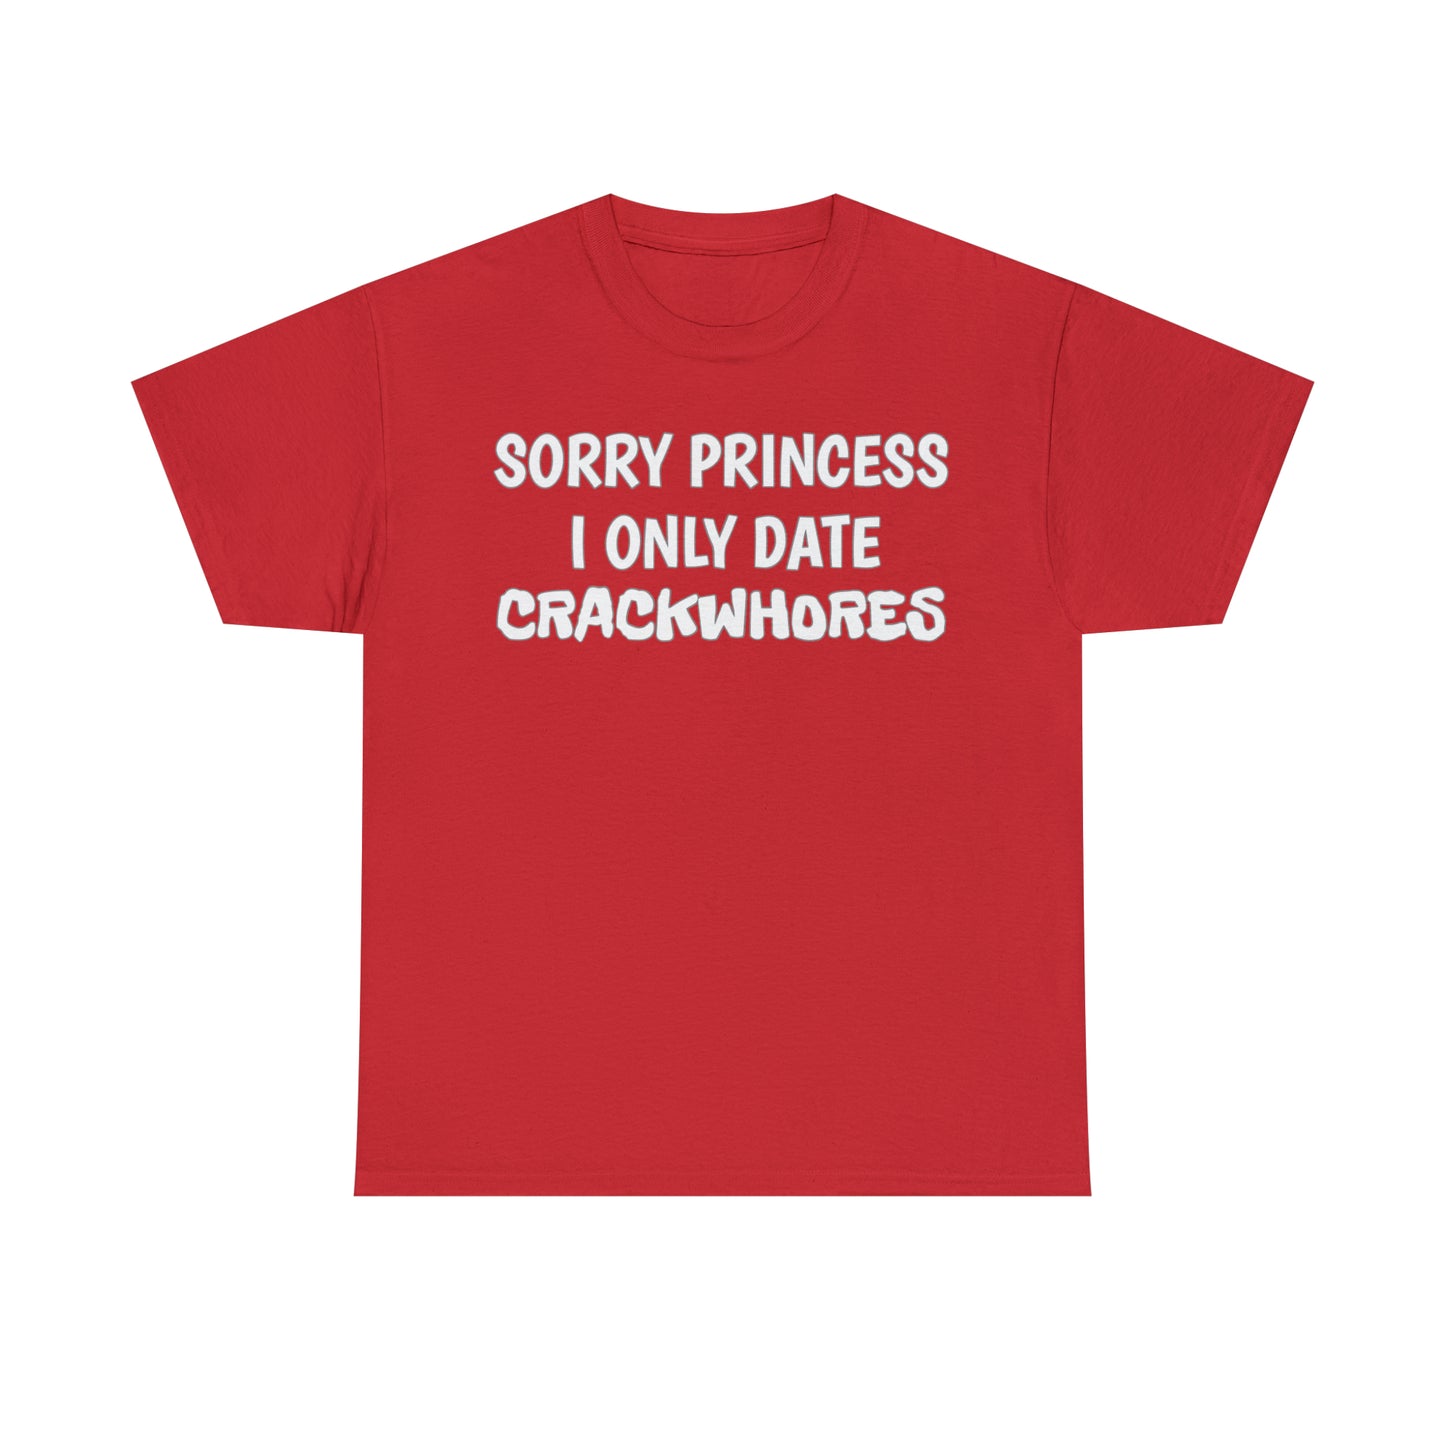 "Sorry Princess I Only Date Crackwhores" Tee